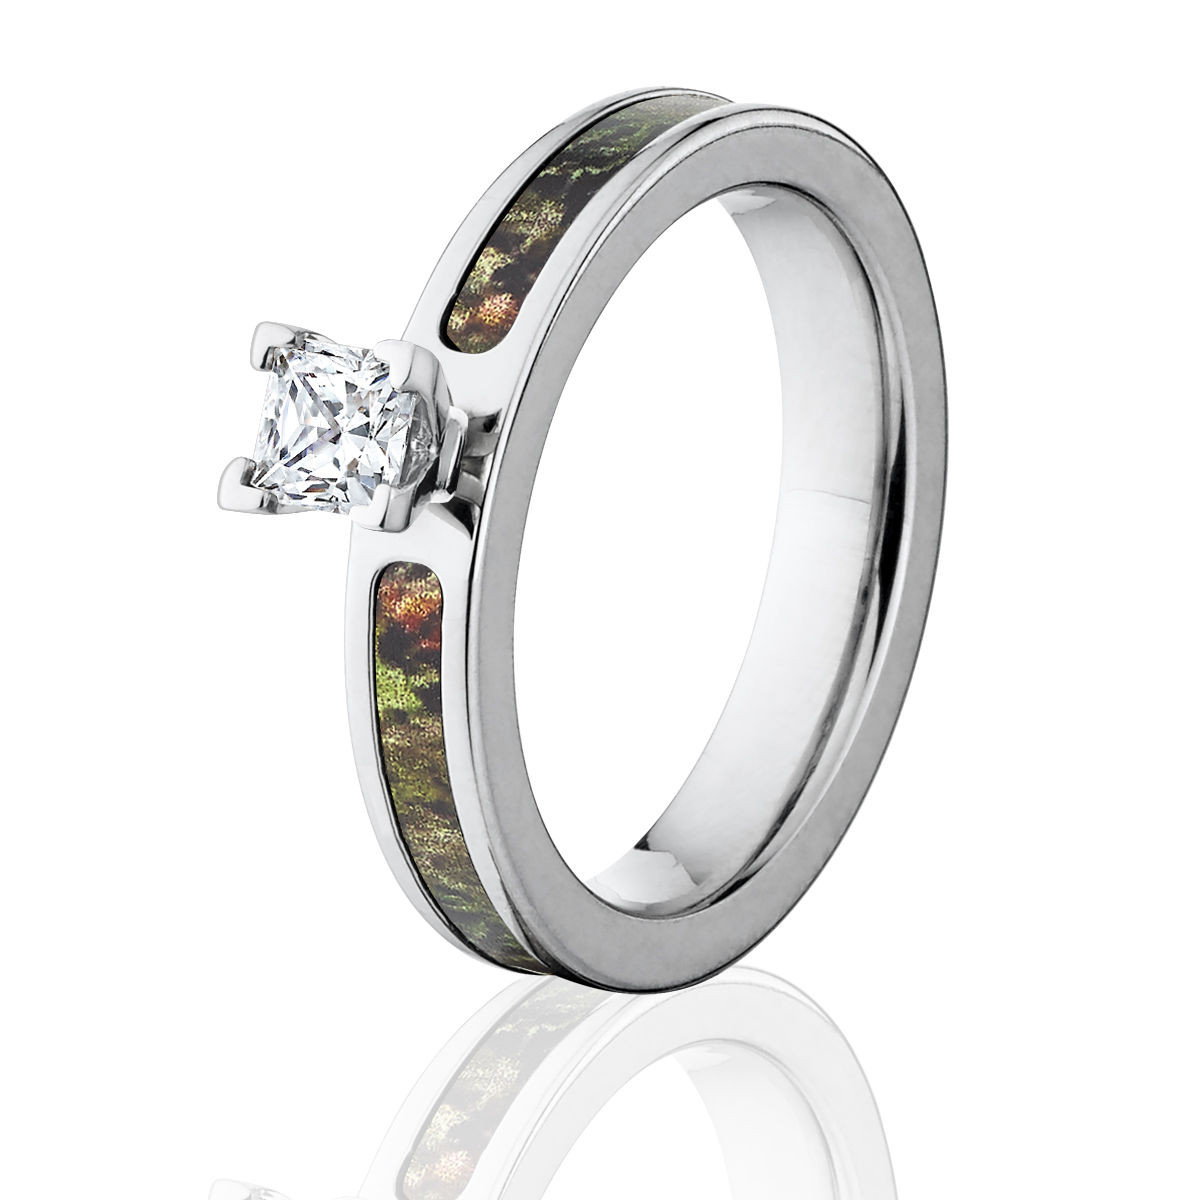 Camo Diamond Engagement Rings
 Princess Cut Mossy Oak Obsession Camo Engagement Rings